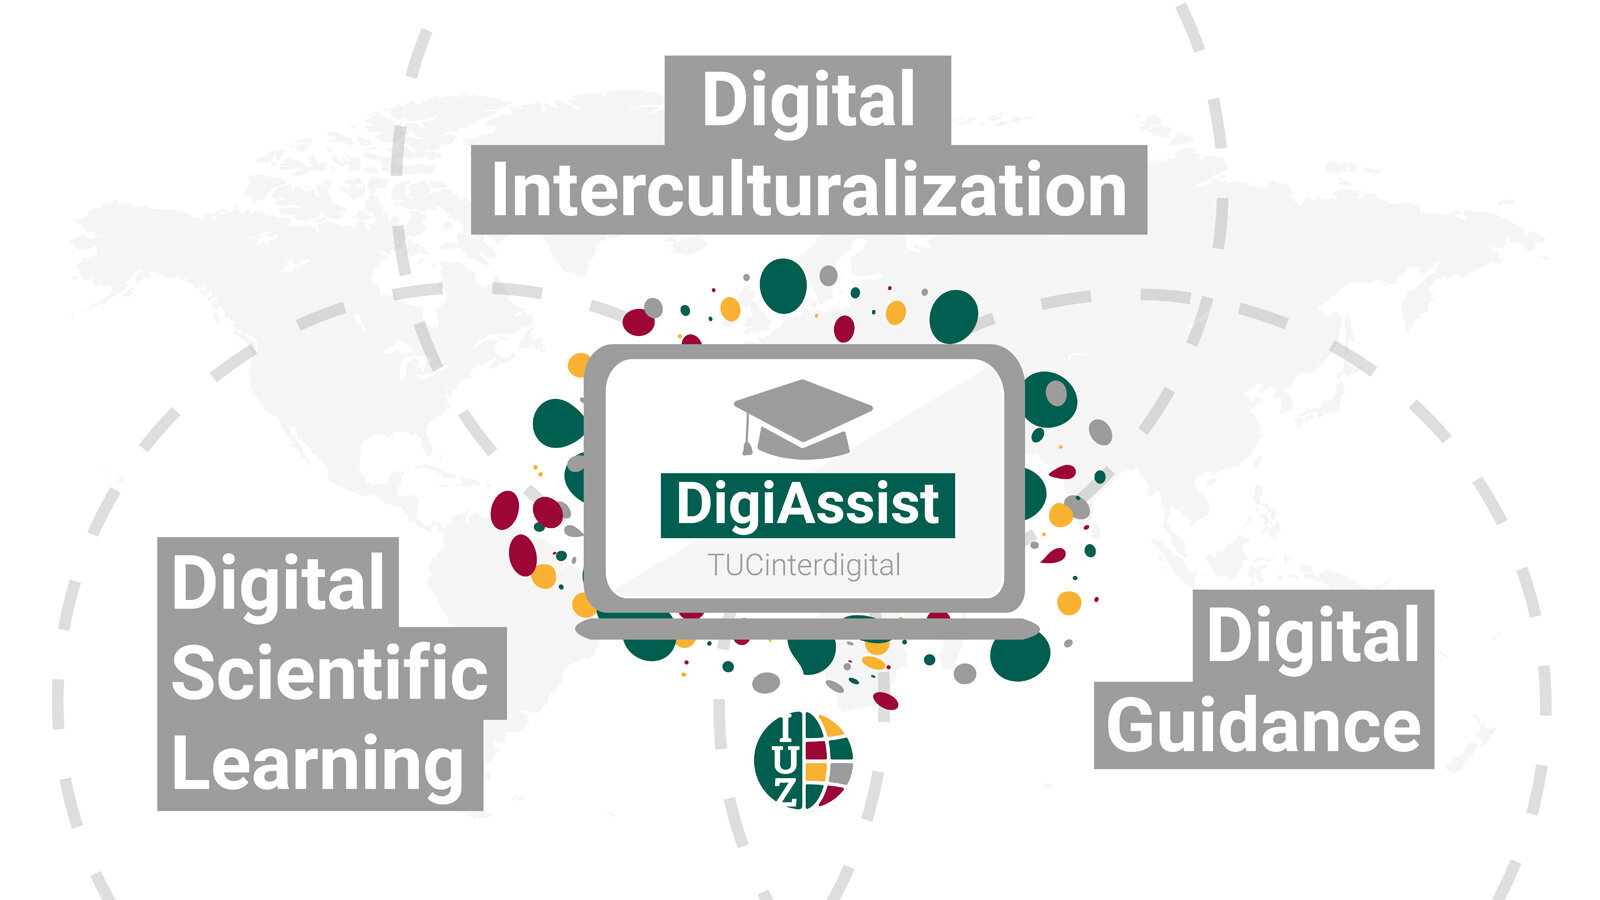 Graphic of a Venn diagram. The first circle reads “Digital Scientific Learning,” the second “Digital Interculturalization,” and the third “Digital Guidance.” The area where the three overlap is labeled “DigiAssist.”